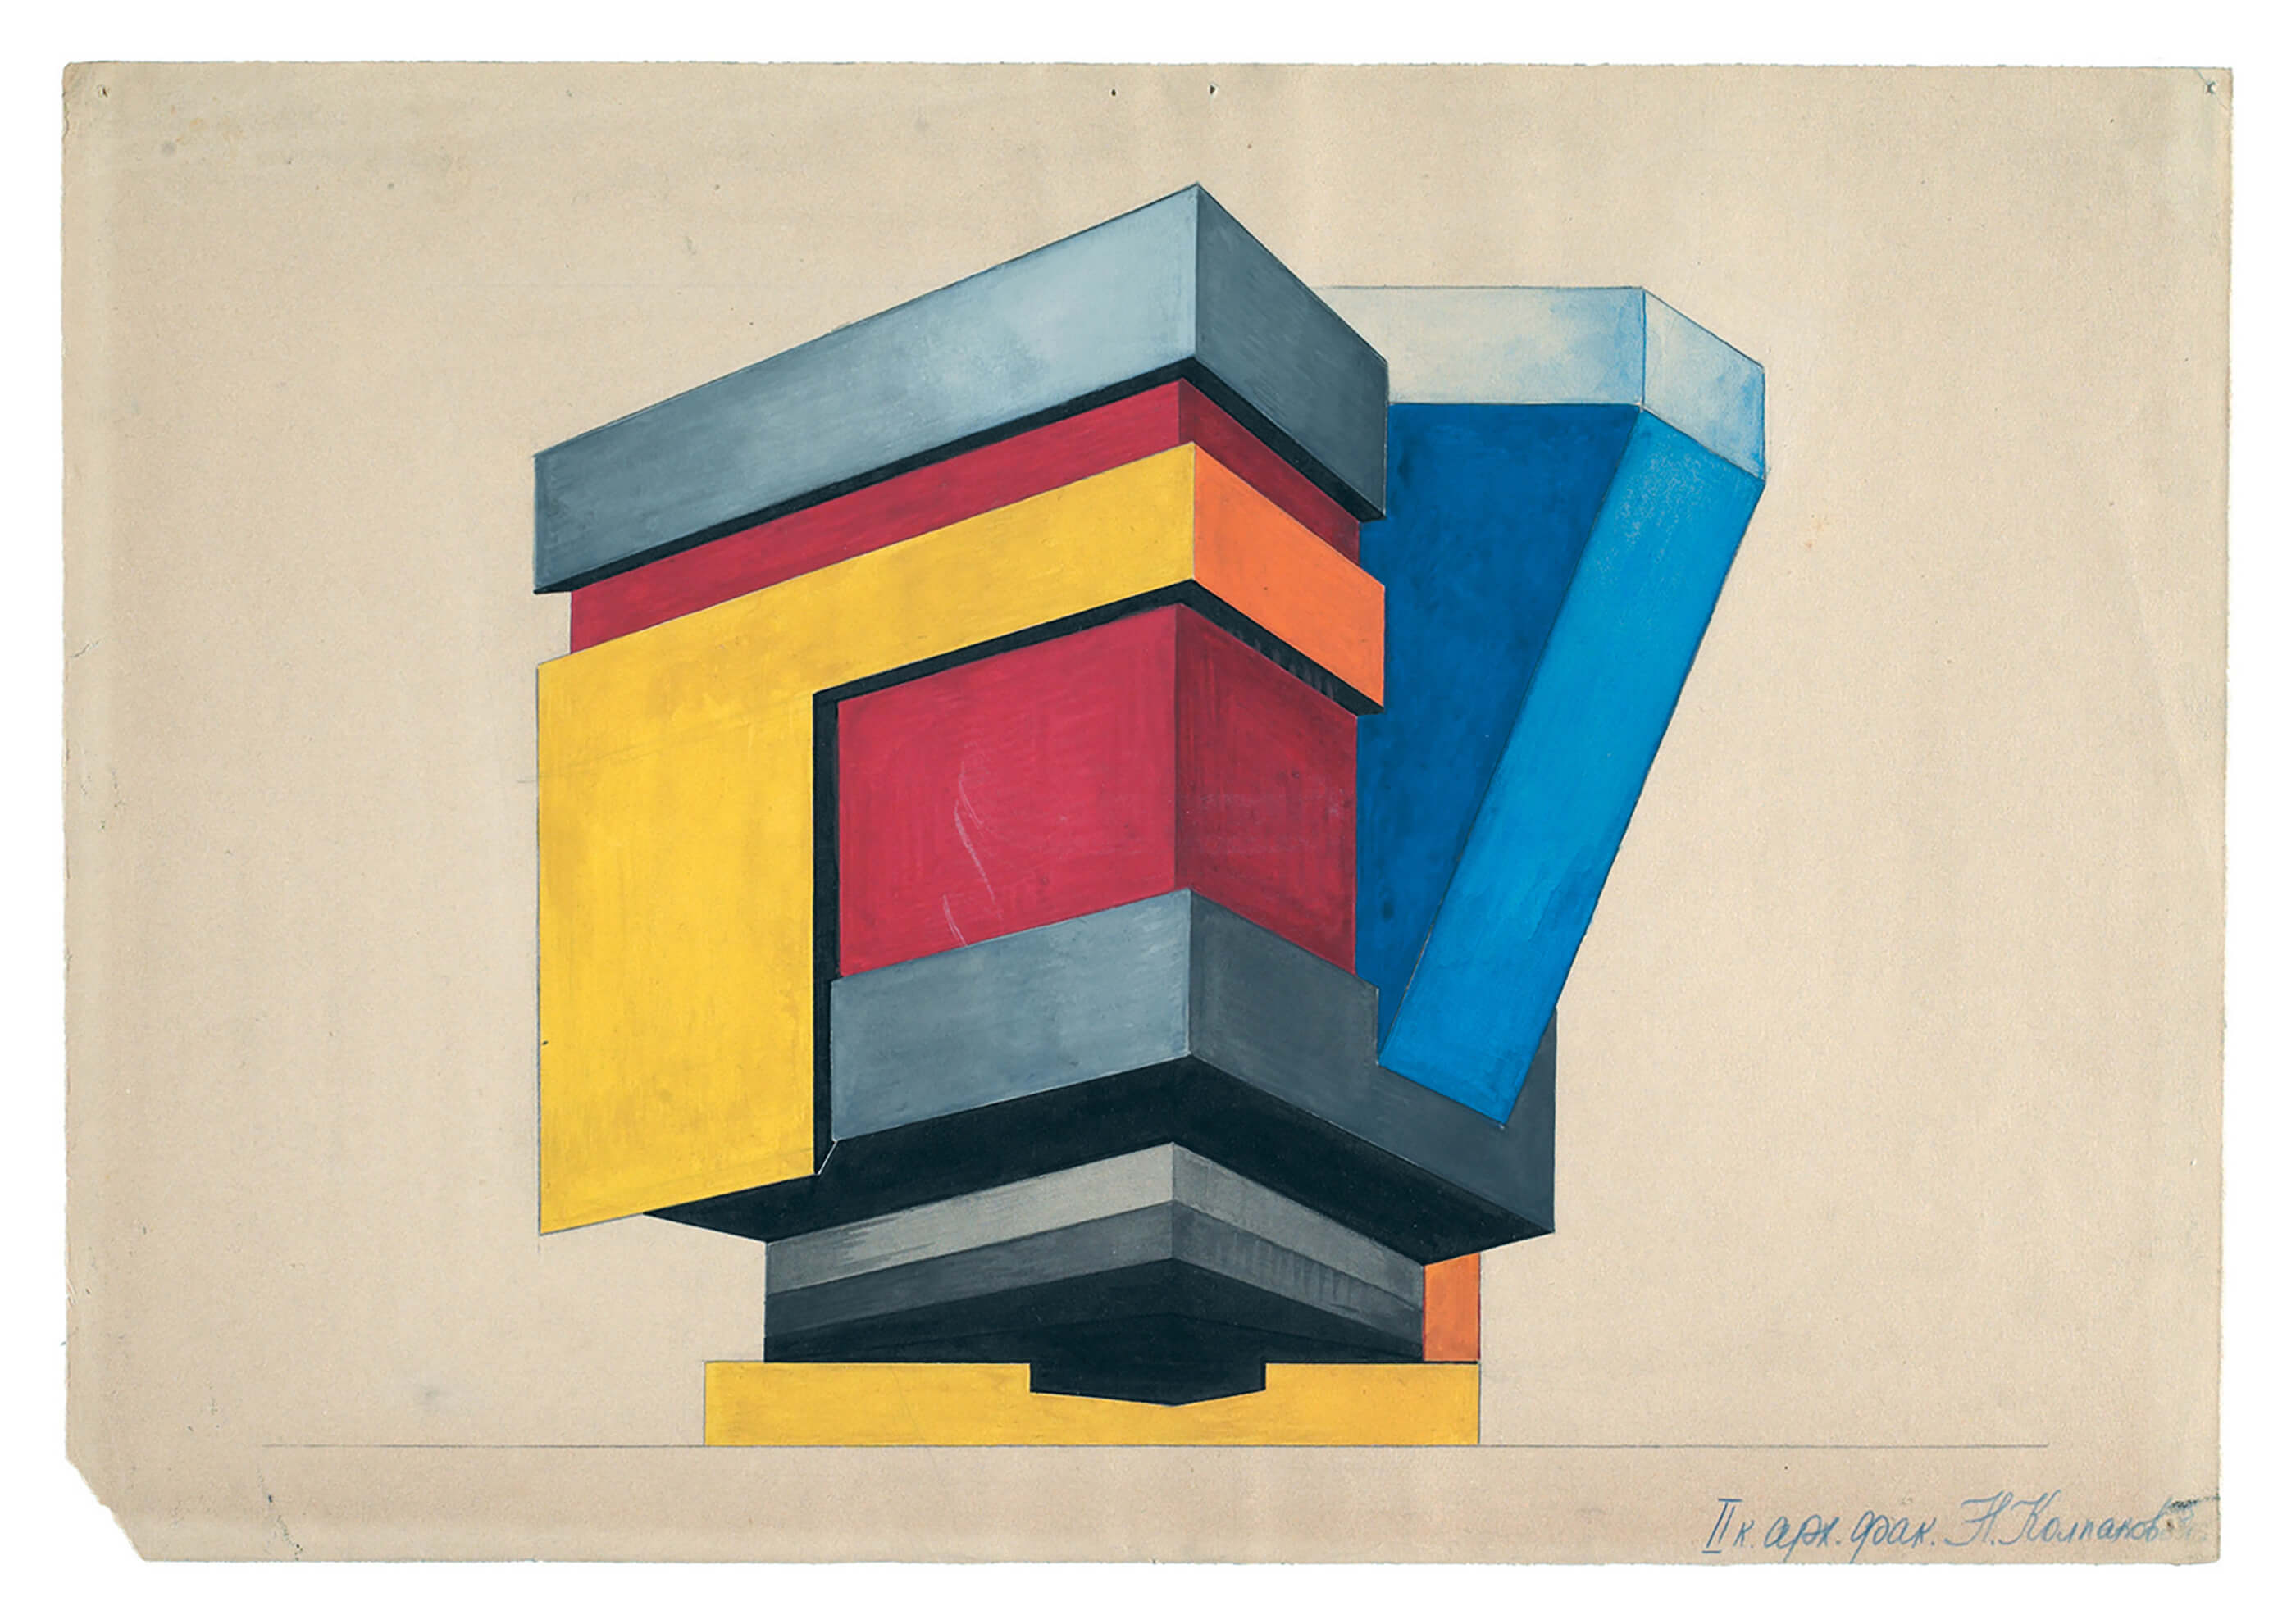 soviet-era architectural drawing in bold colors